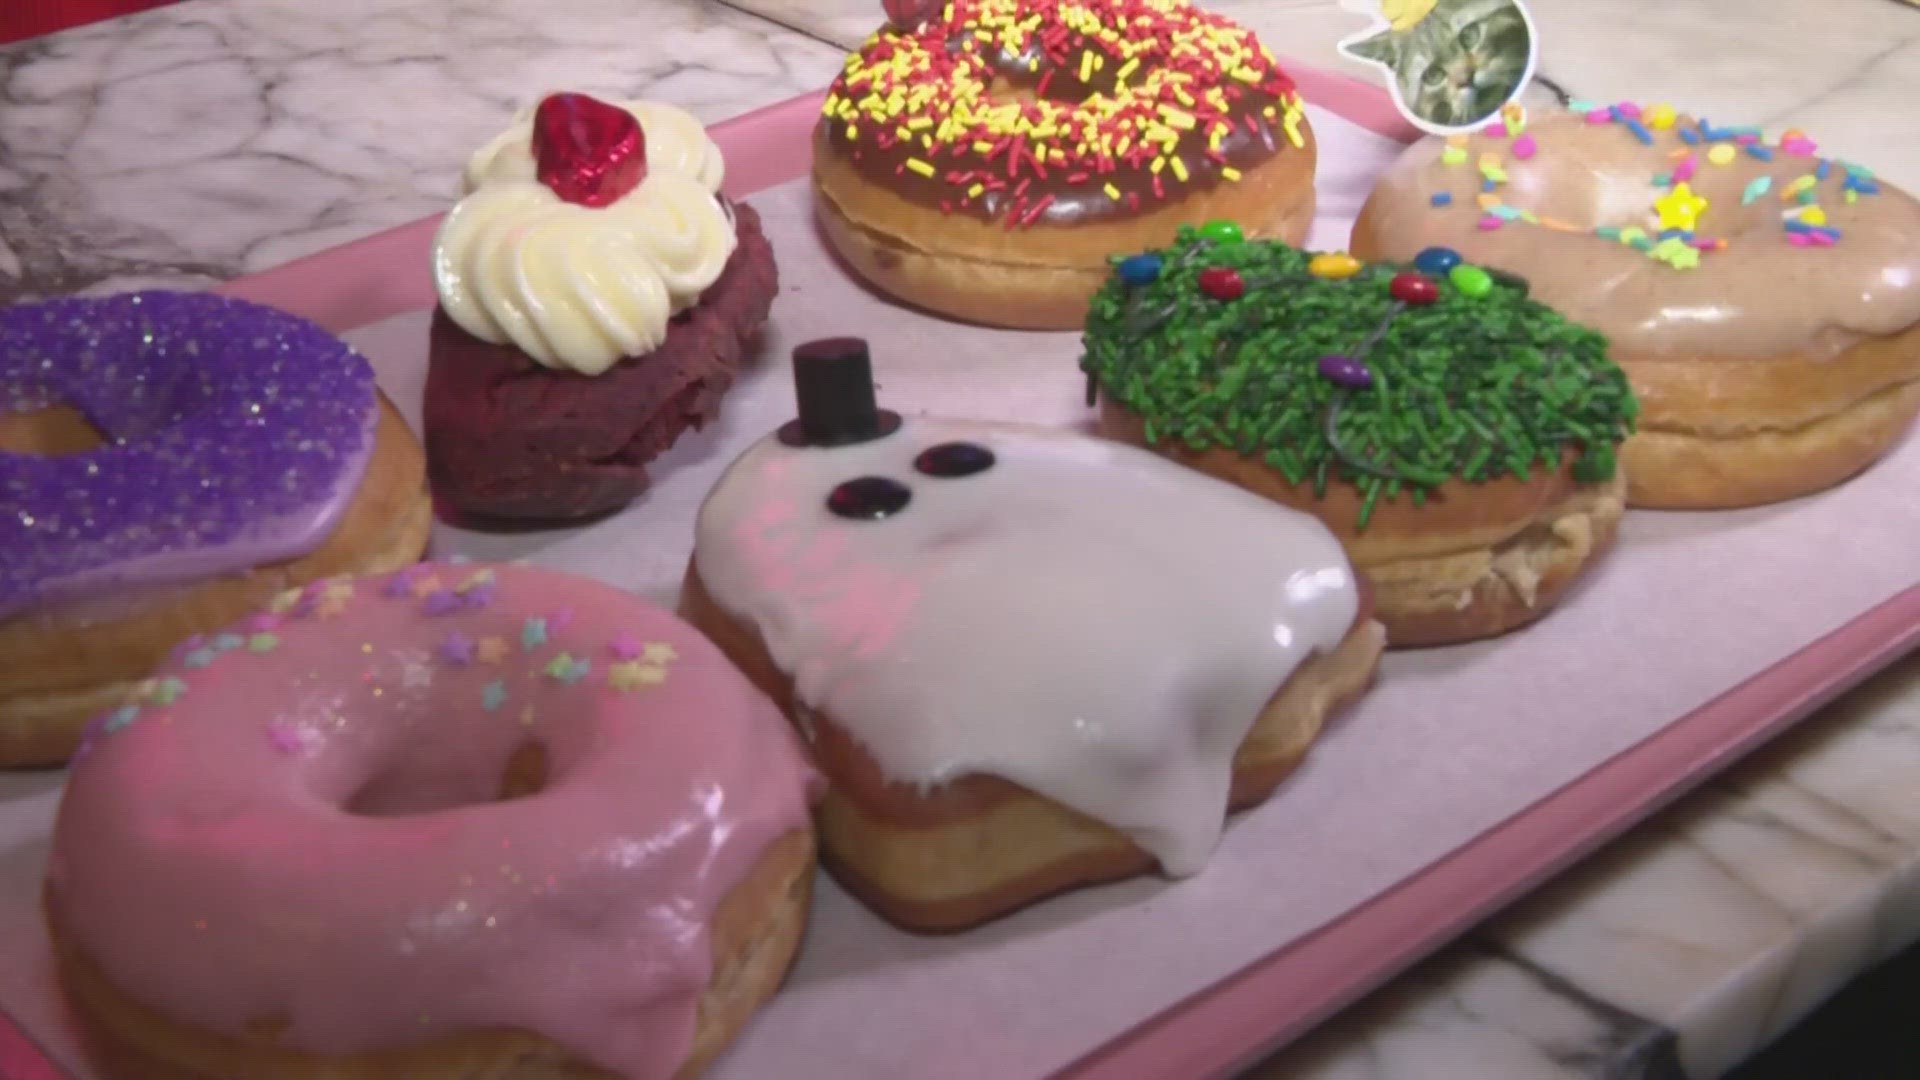 Brewnuts is offering a wide variety of Taylor Swift inspired donuts and drinks in honor of her 34th birthday.